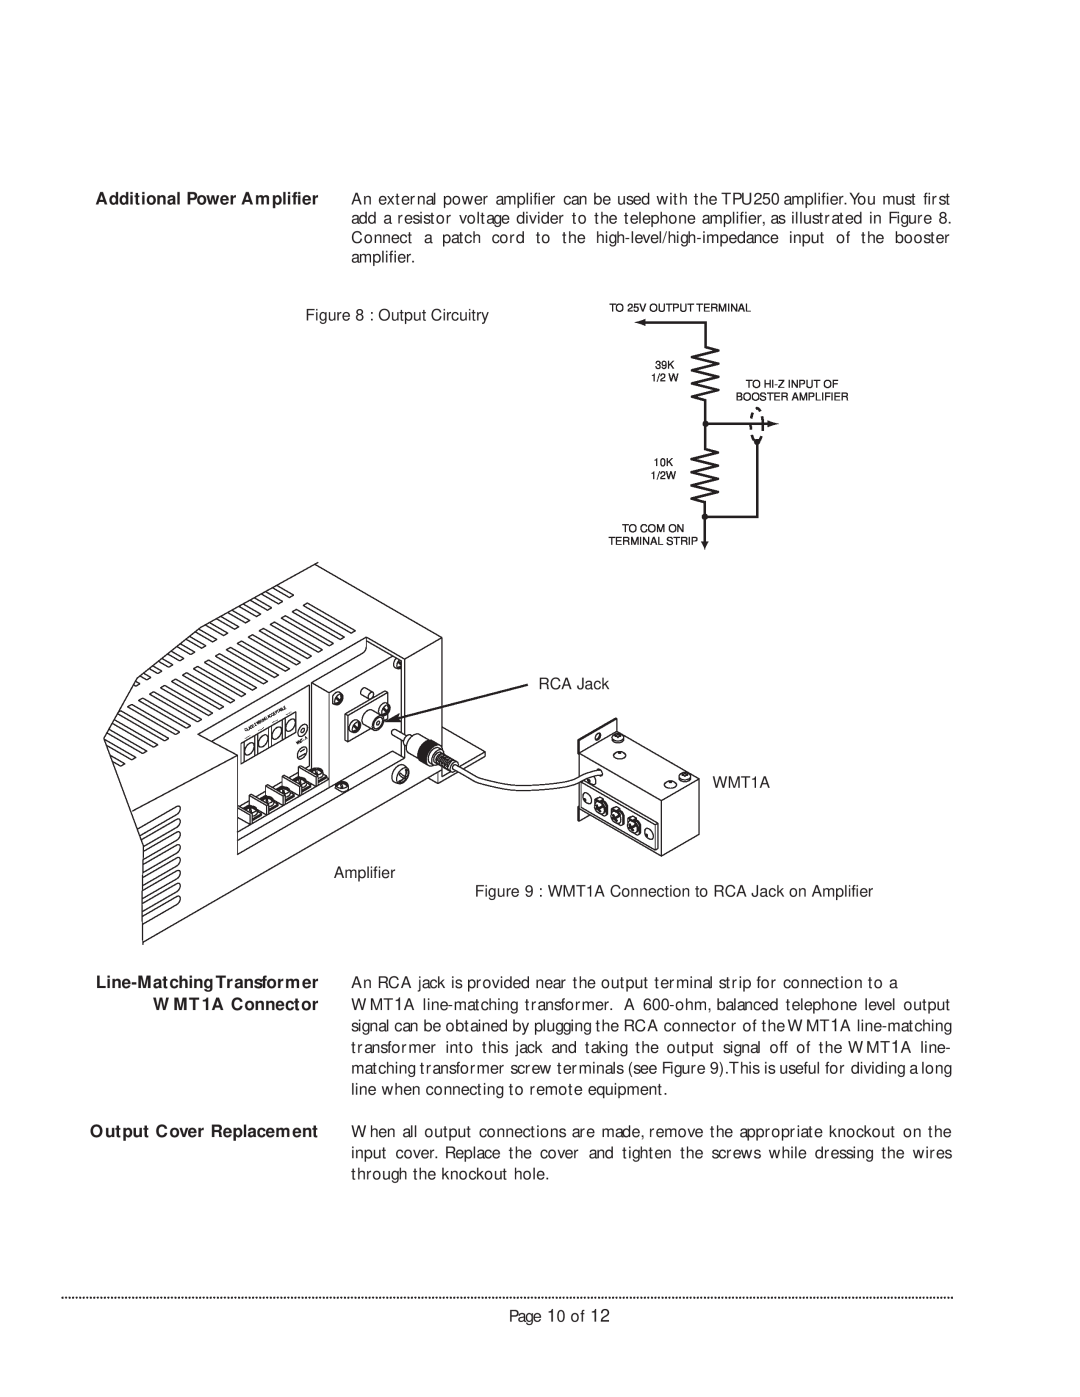 Bogen TPU250 manual Page 10 of 